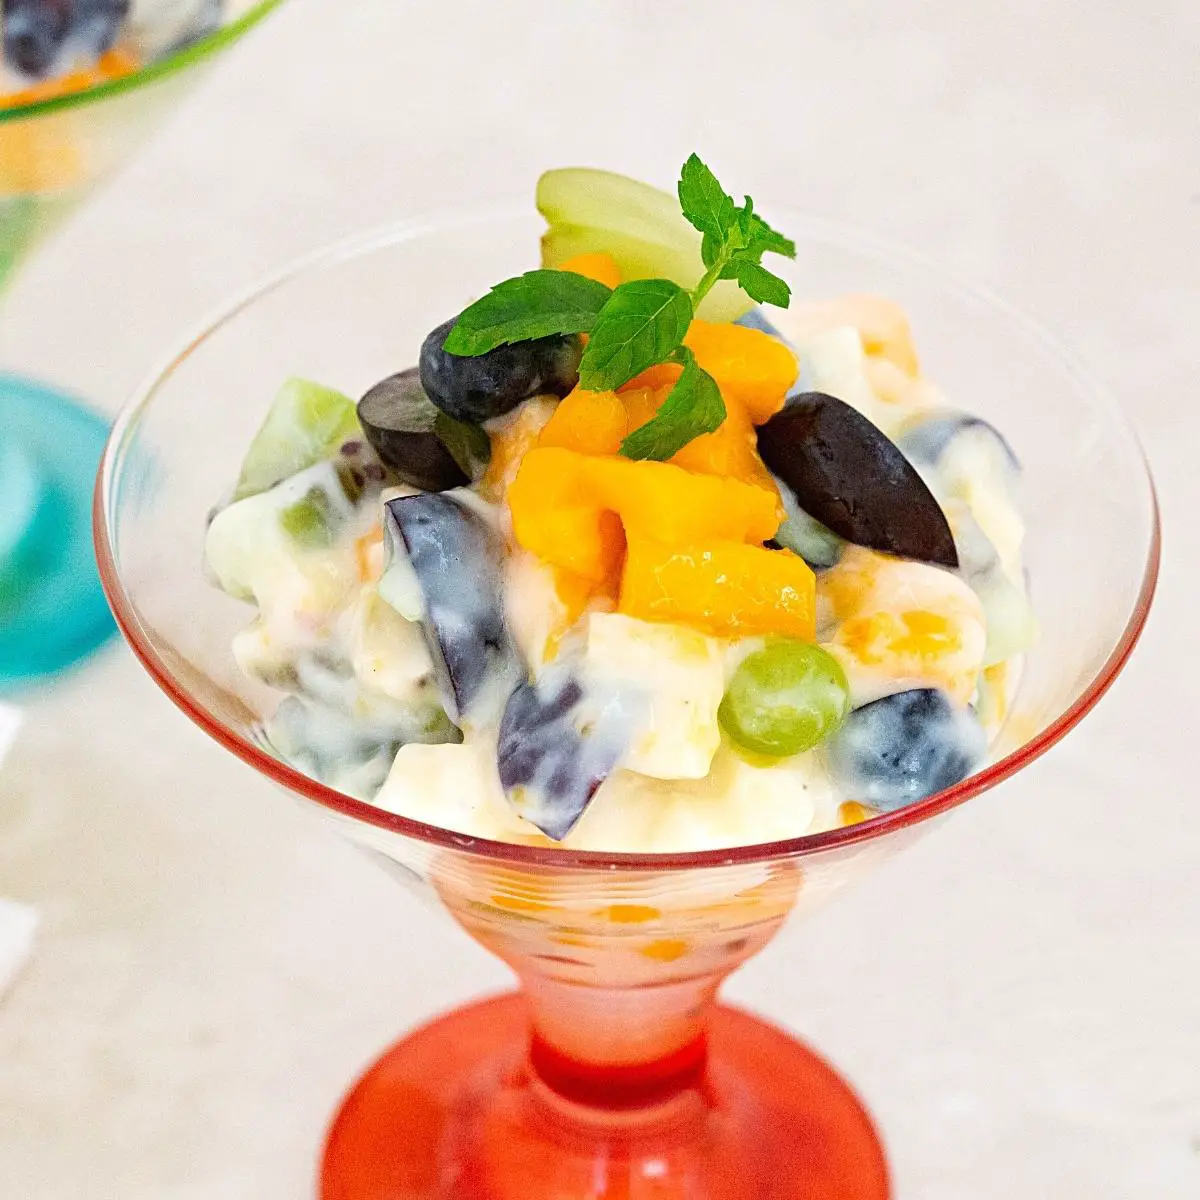 A cup of fruit salad with custard.